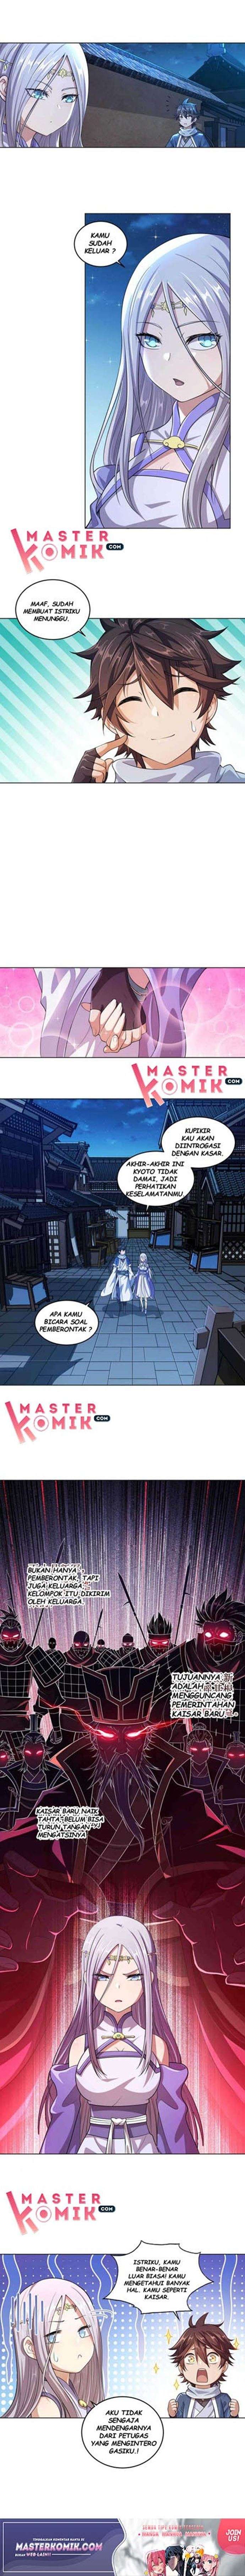 My Lady Is Actually the Empress? Chapter 01.3 Bahasa Indonesia